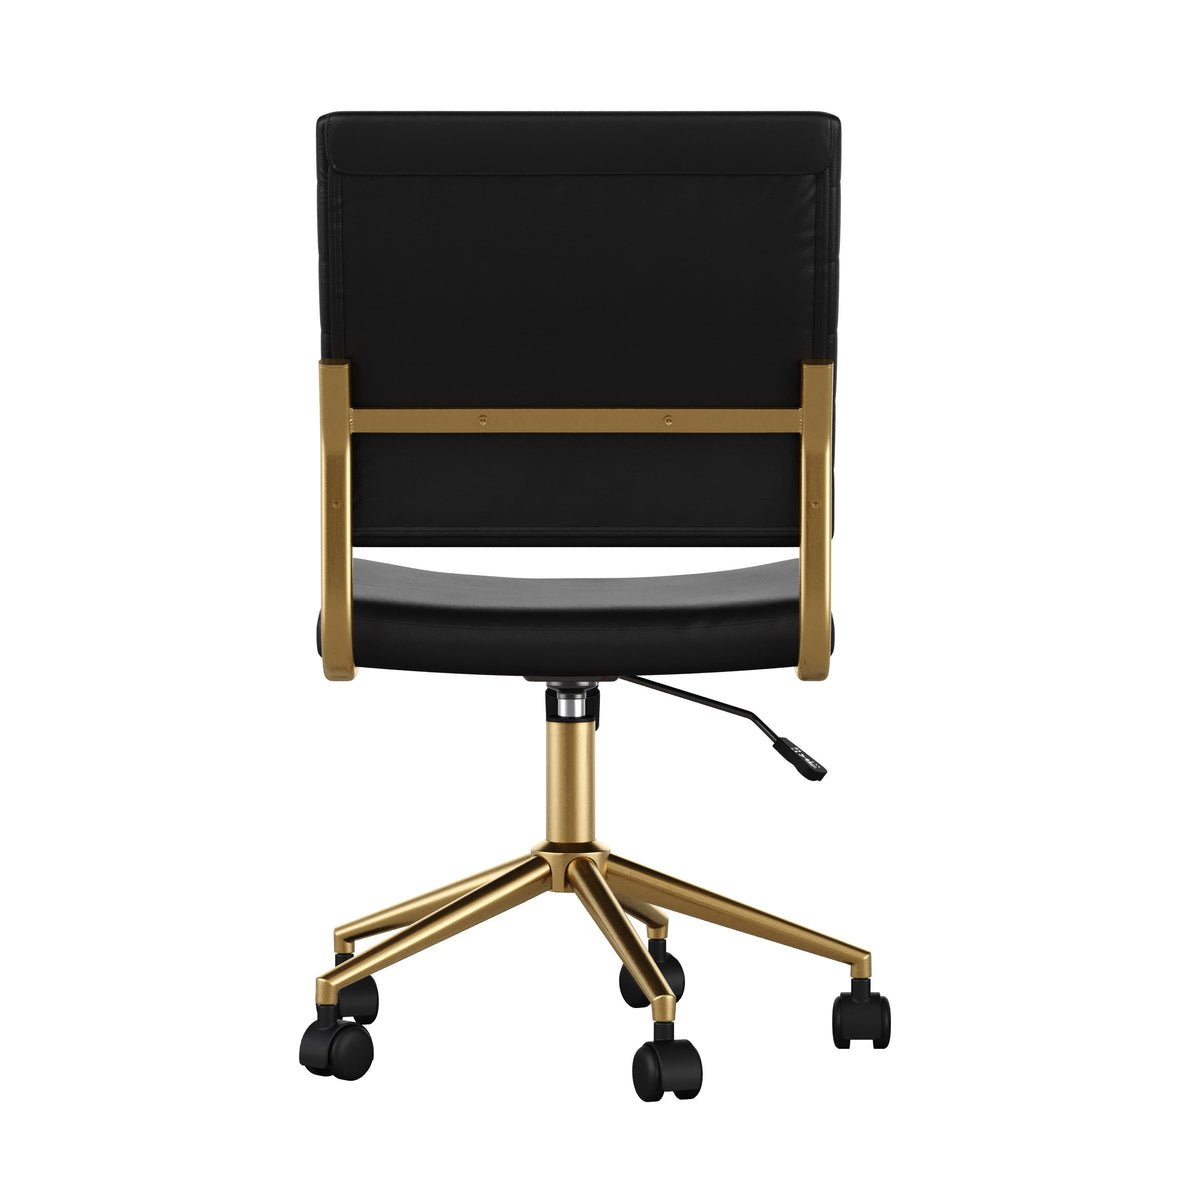 Black Faux Leather/Polished Brass |#| Ribbed Faux Leather Armless Swivel Home Office Chair - Black/Polished Brass